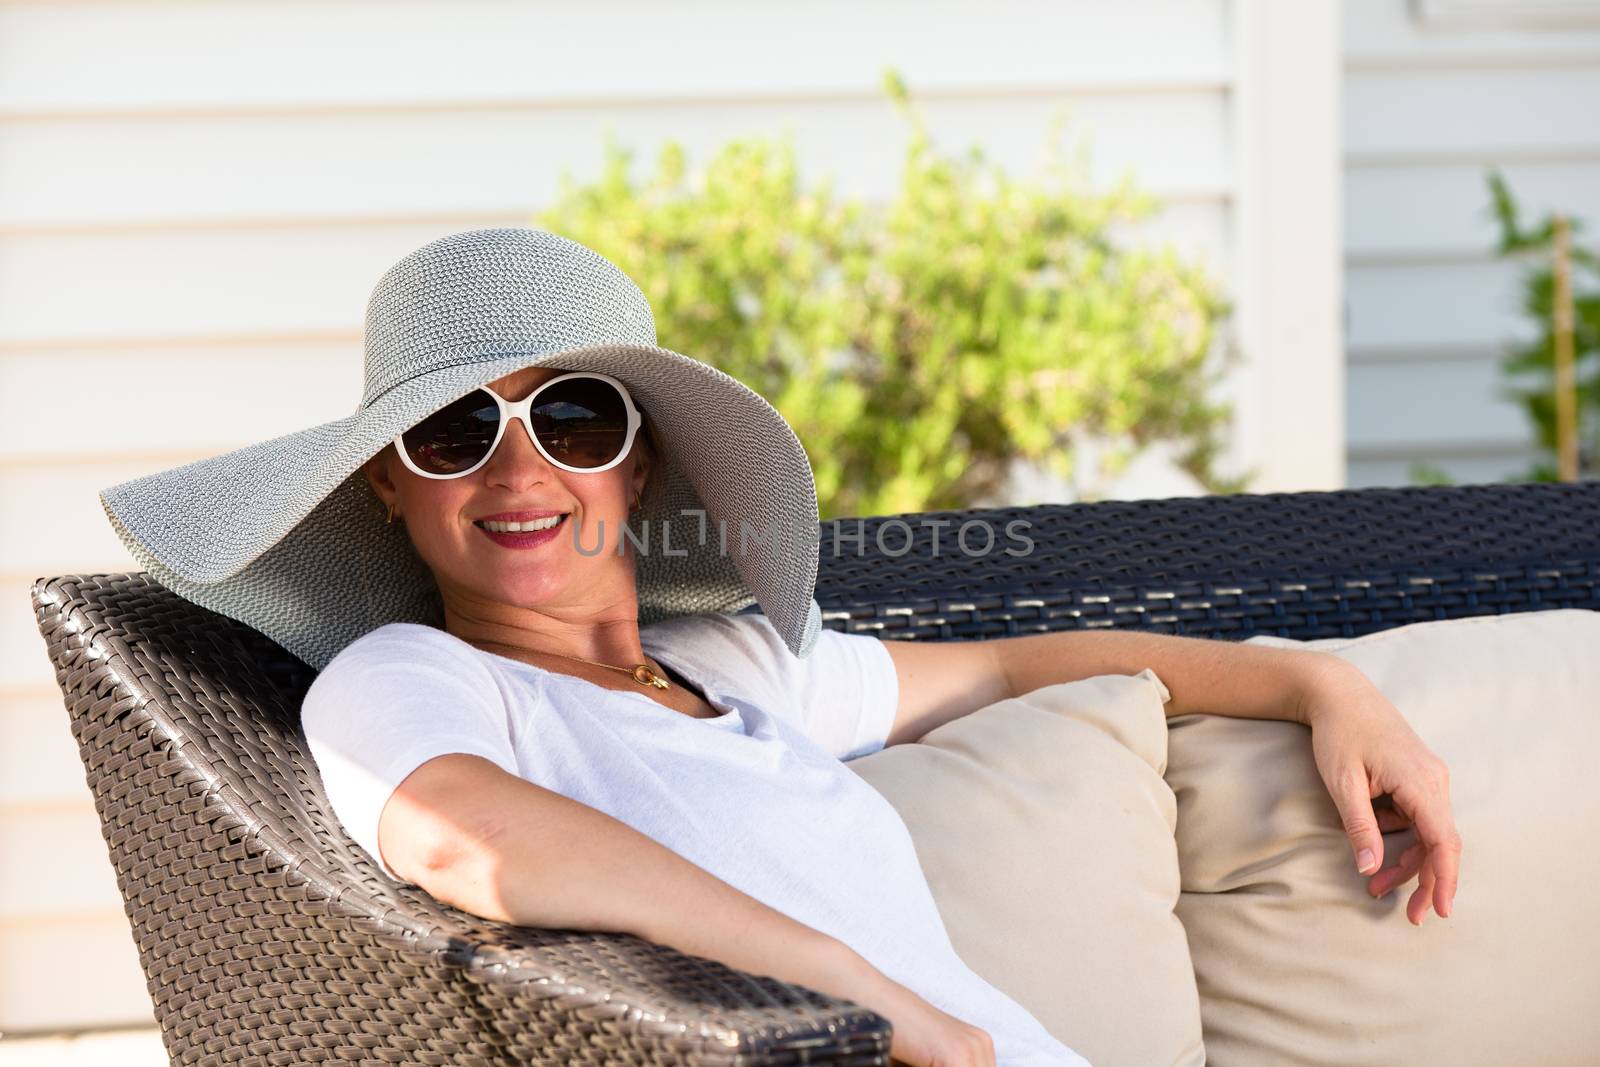 Candid Waist Up Portrait of Woman Wearing Large Brimmed Sun Hat and Sunglasses Relaxing Outdoors on Patio Love Seat with Comfortable Cushions in Back Yard on Sunny Summer Day